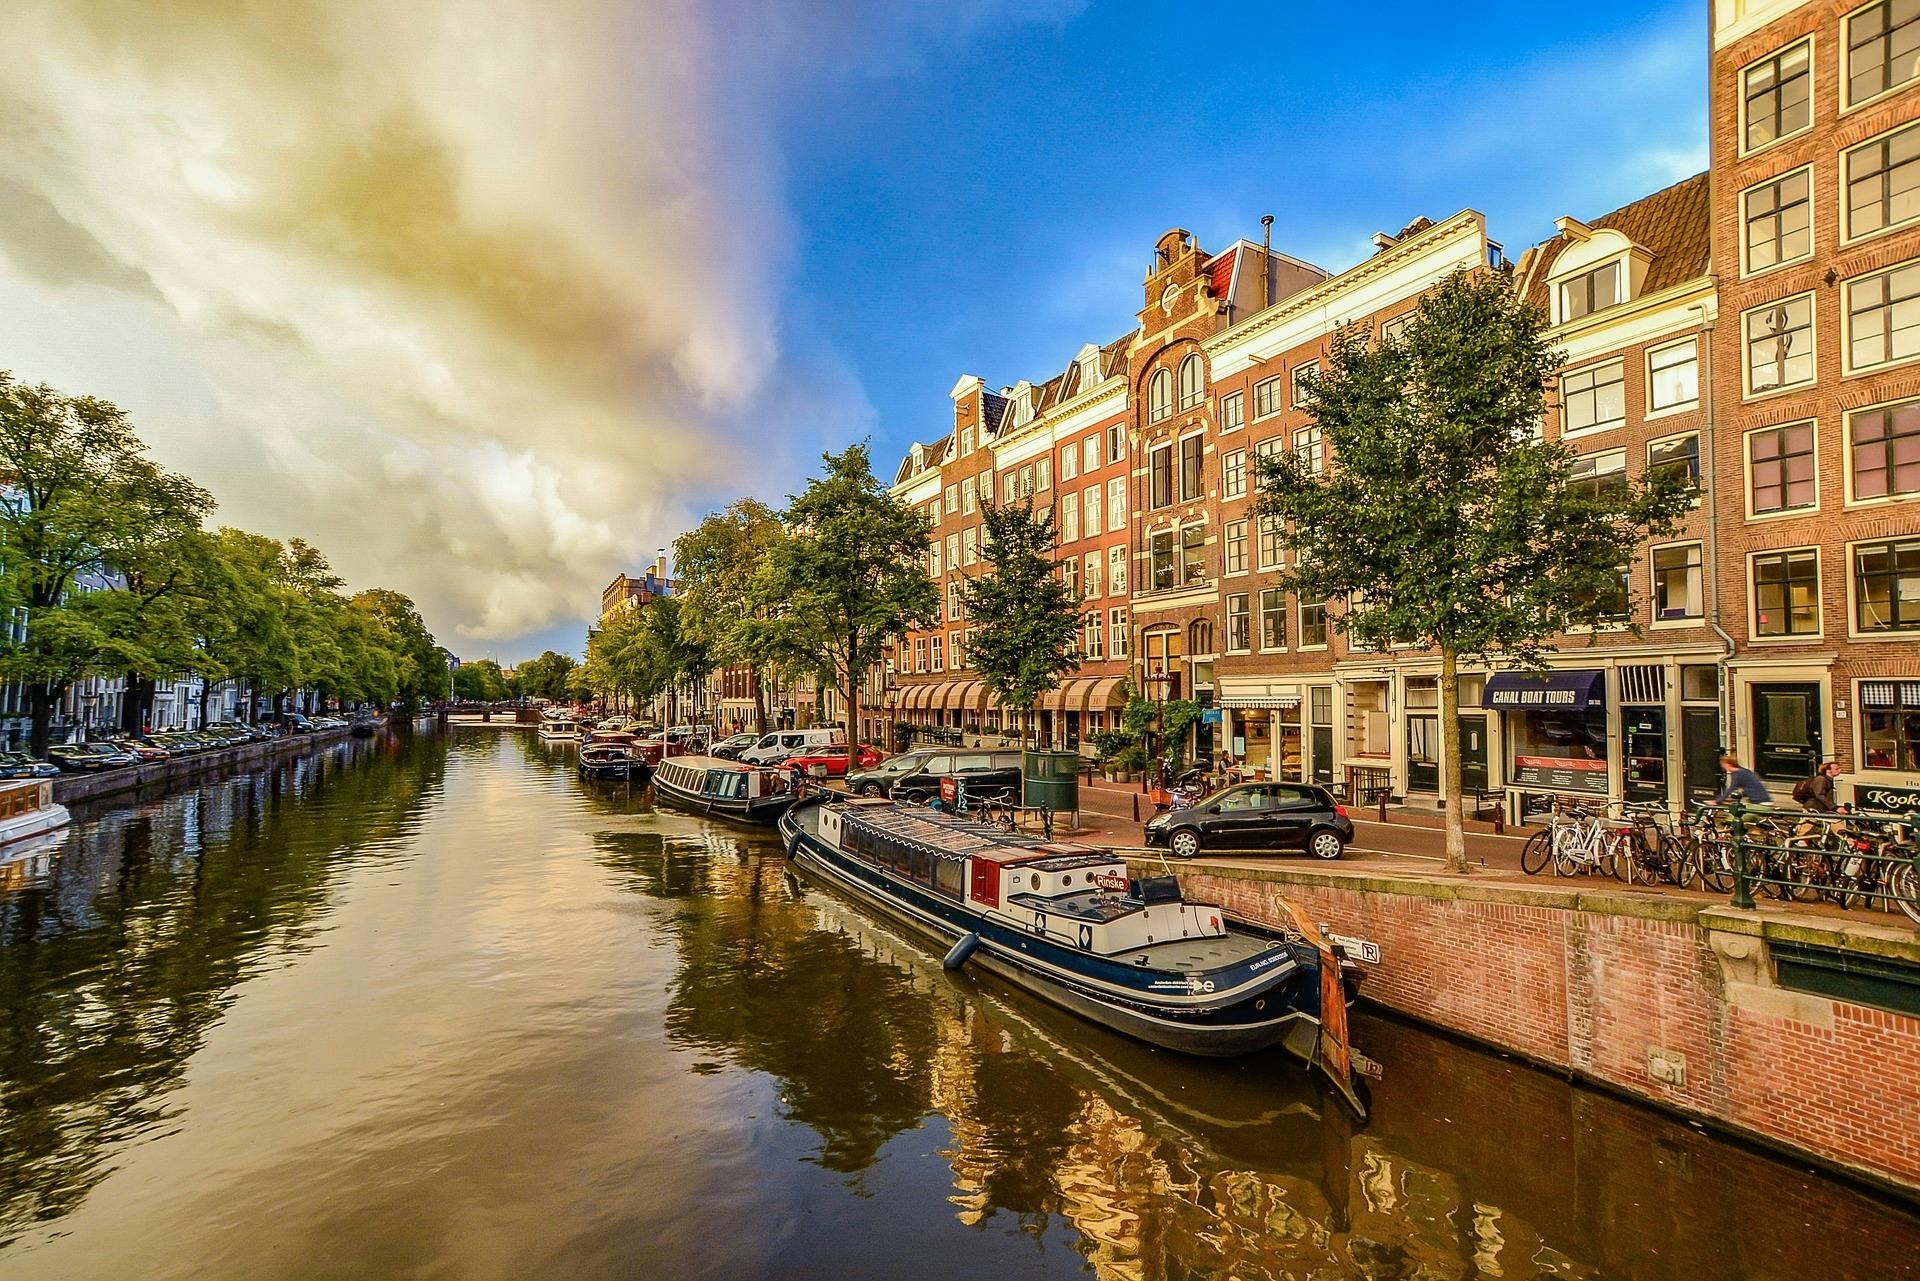 Shared tour of the 'Glory of Holland' and Amsterdam from Brussels